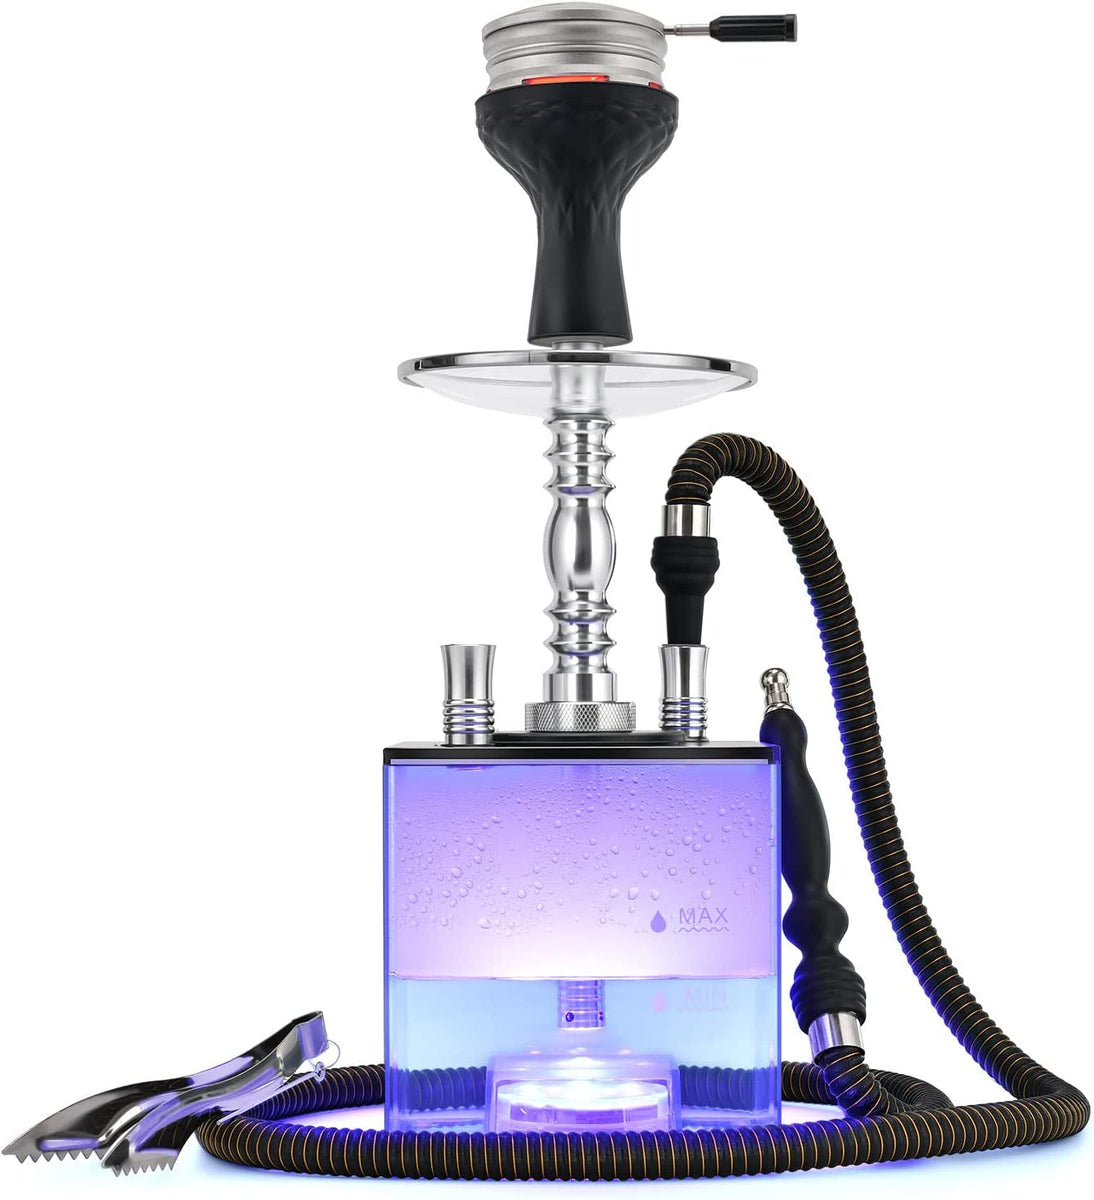  Hookah Complete Set with Everything - Kitosun Portable Travel  Shisha with Bag Include HMD Phunnel Bowl Silicone Hose Handle Ash Tray LED  Light and Tongs Supports 2hoses (Aluminum) : Health 